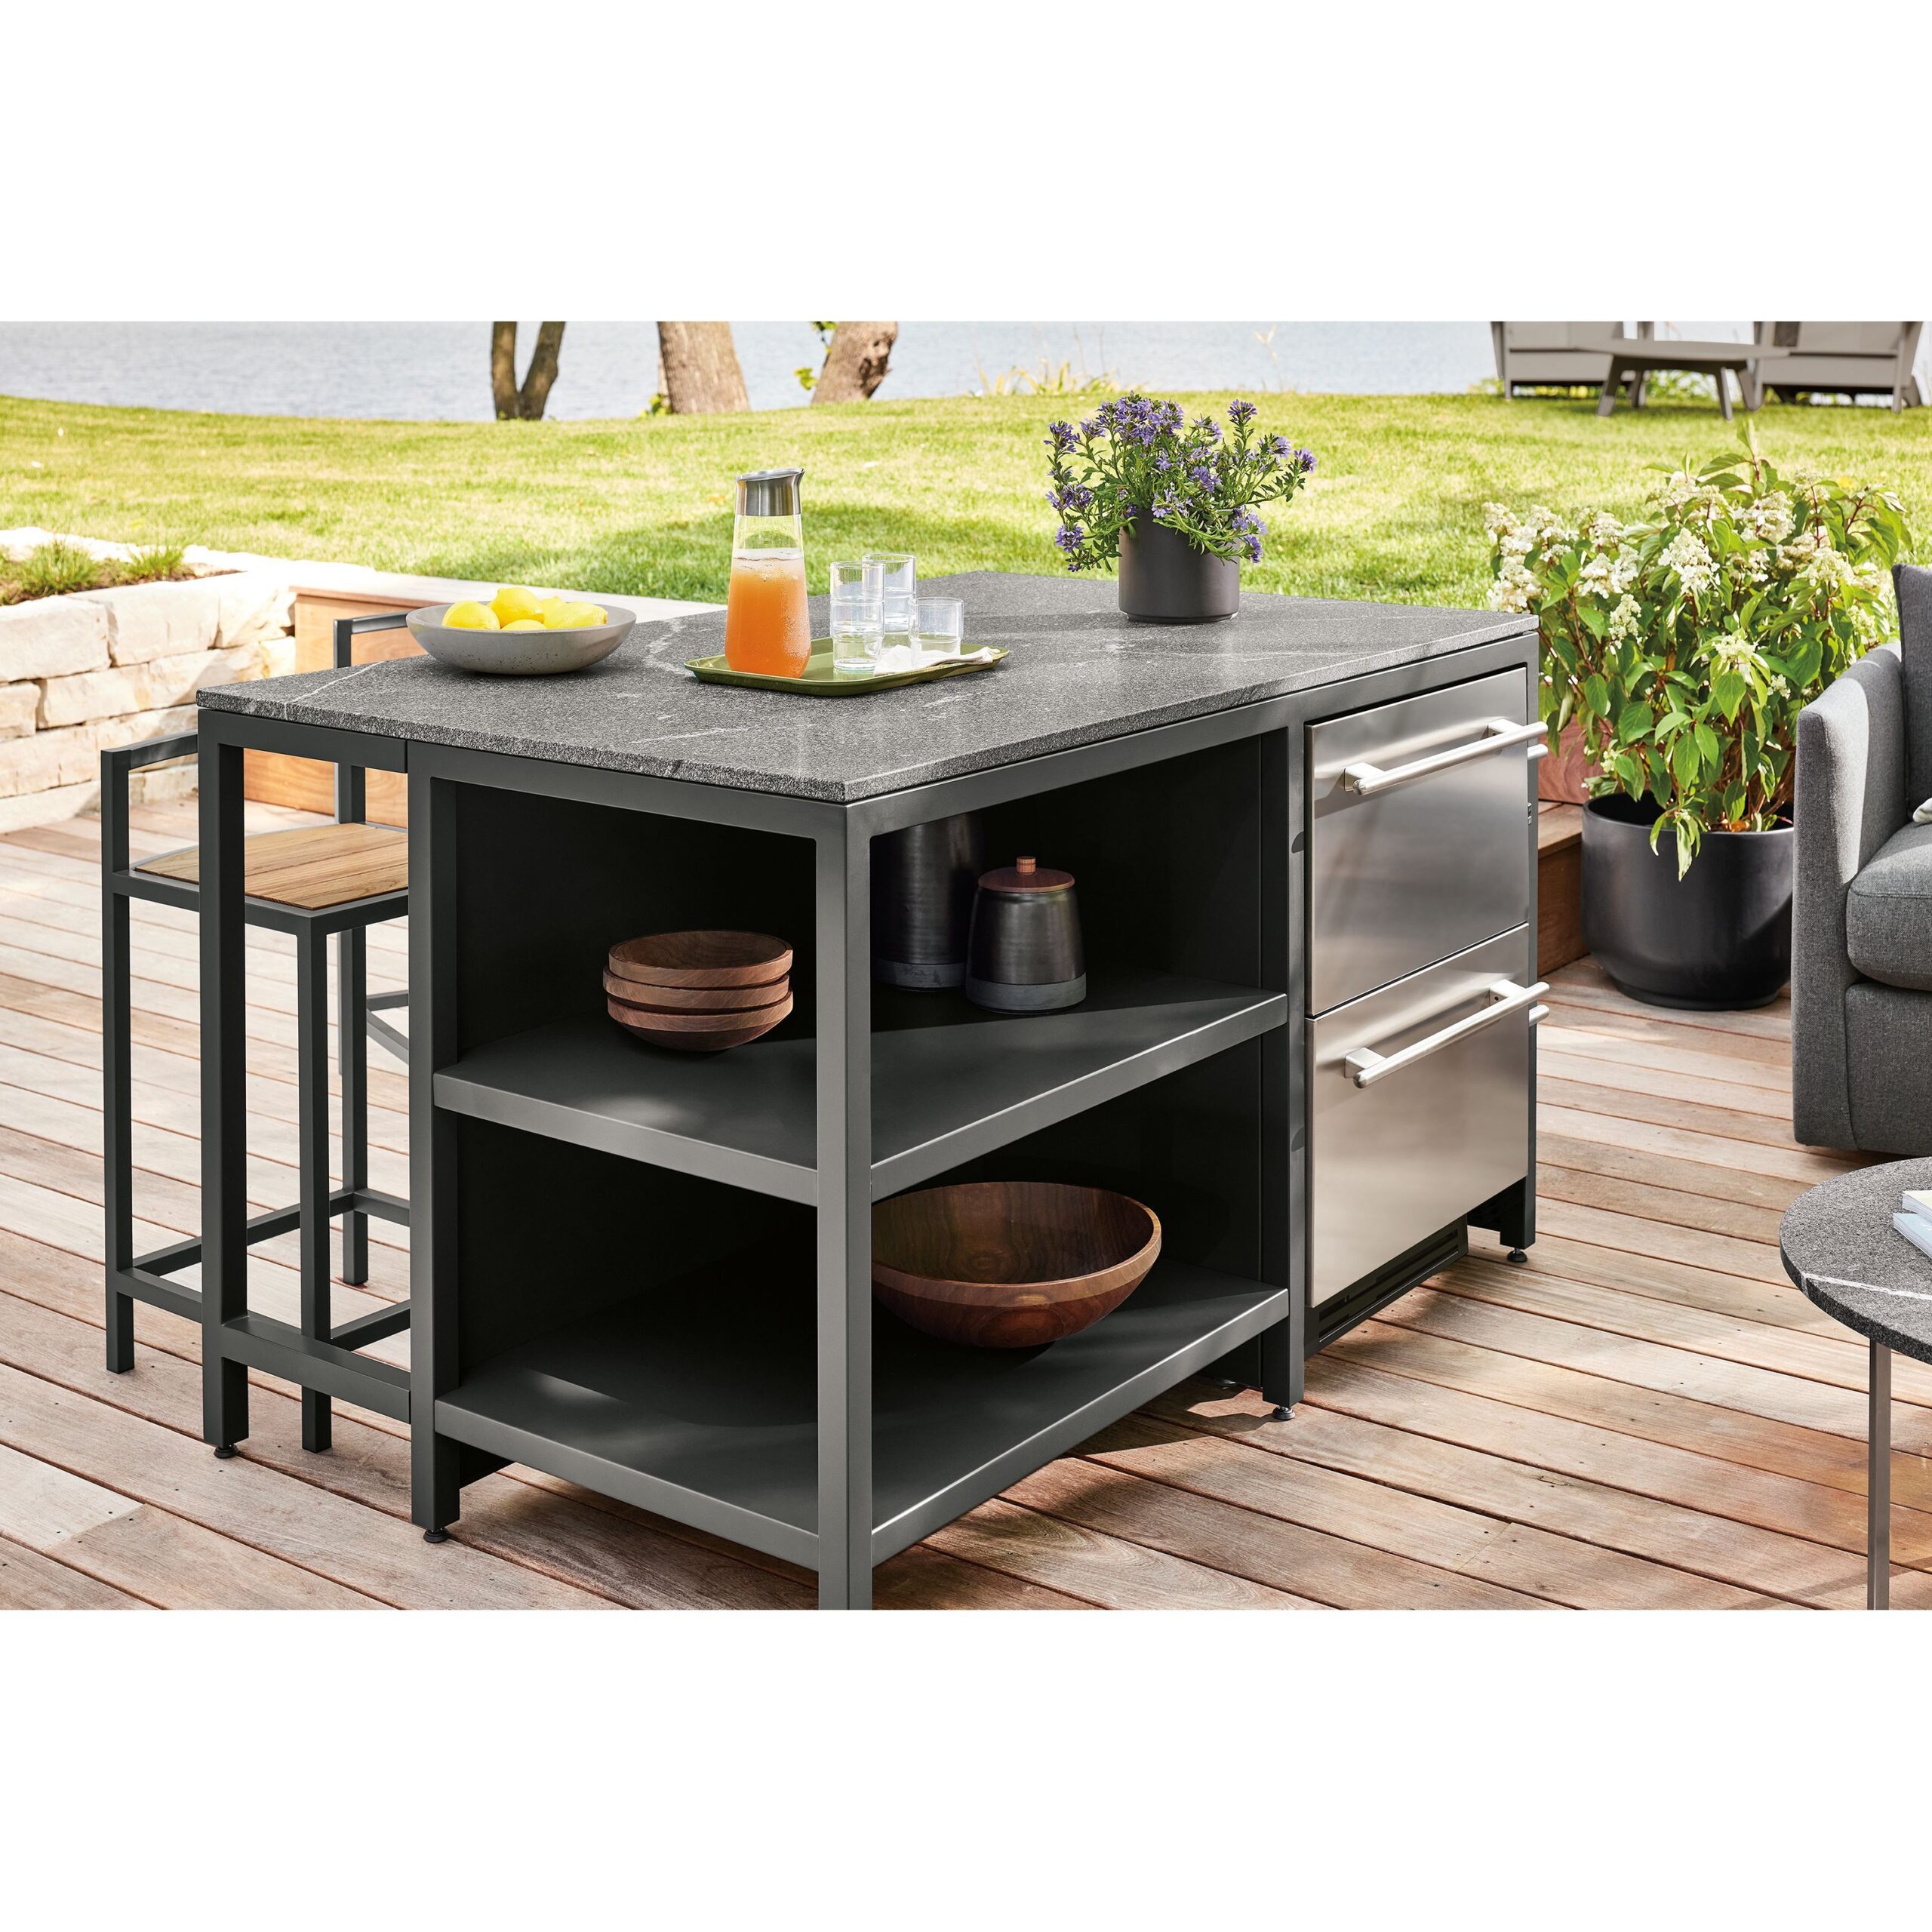 Enhance Your Outdoor Living Space with Stylish Cabinets